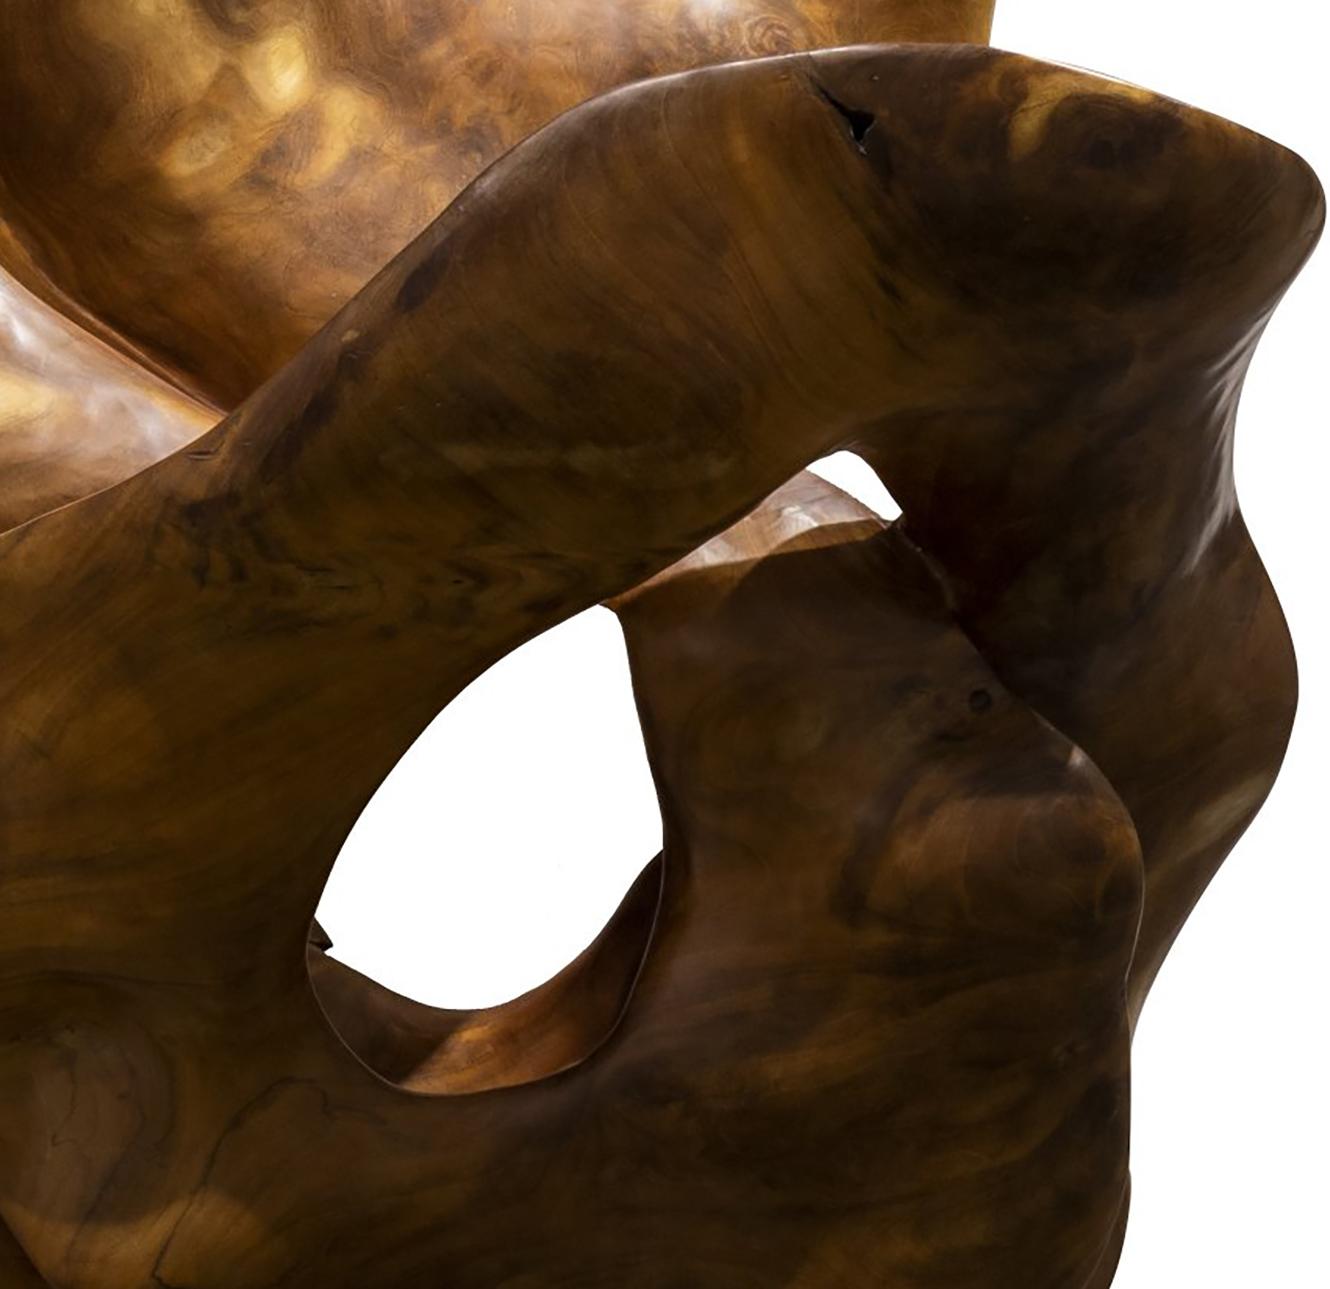 Abrazo - 21st Century, Contemporary, Abstract Sculpture, Mahogany Root, Wood 3